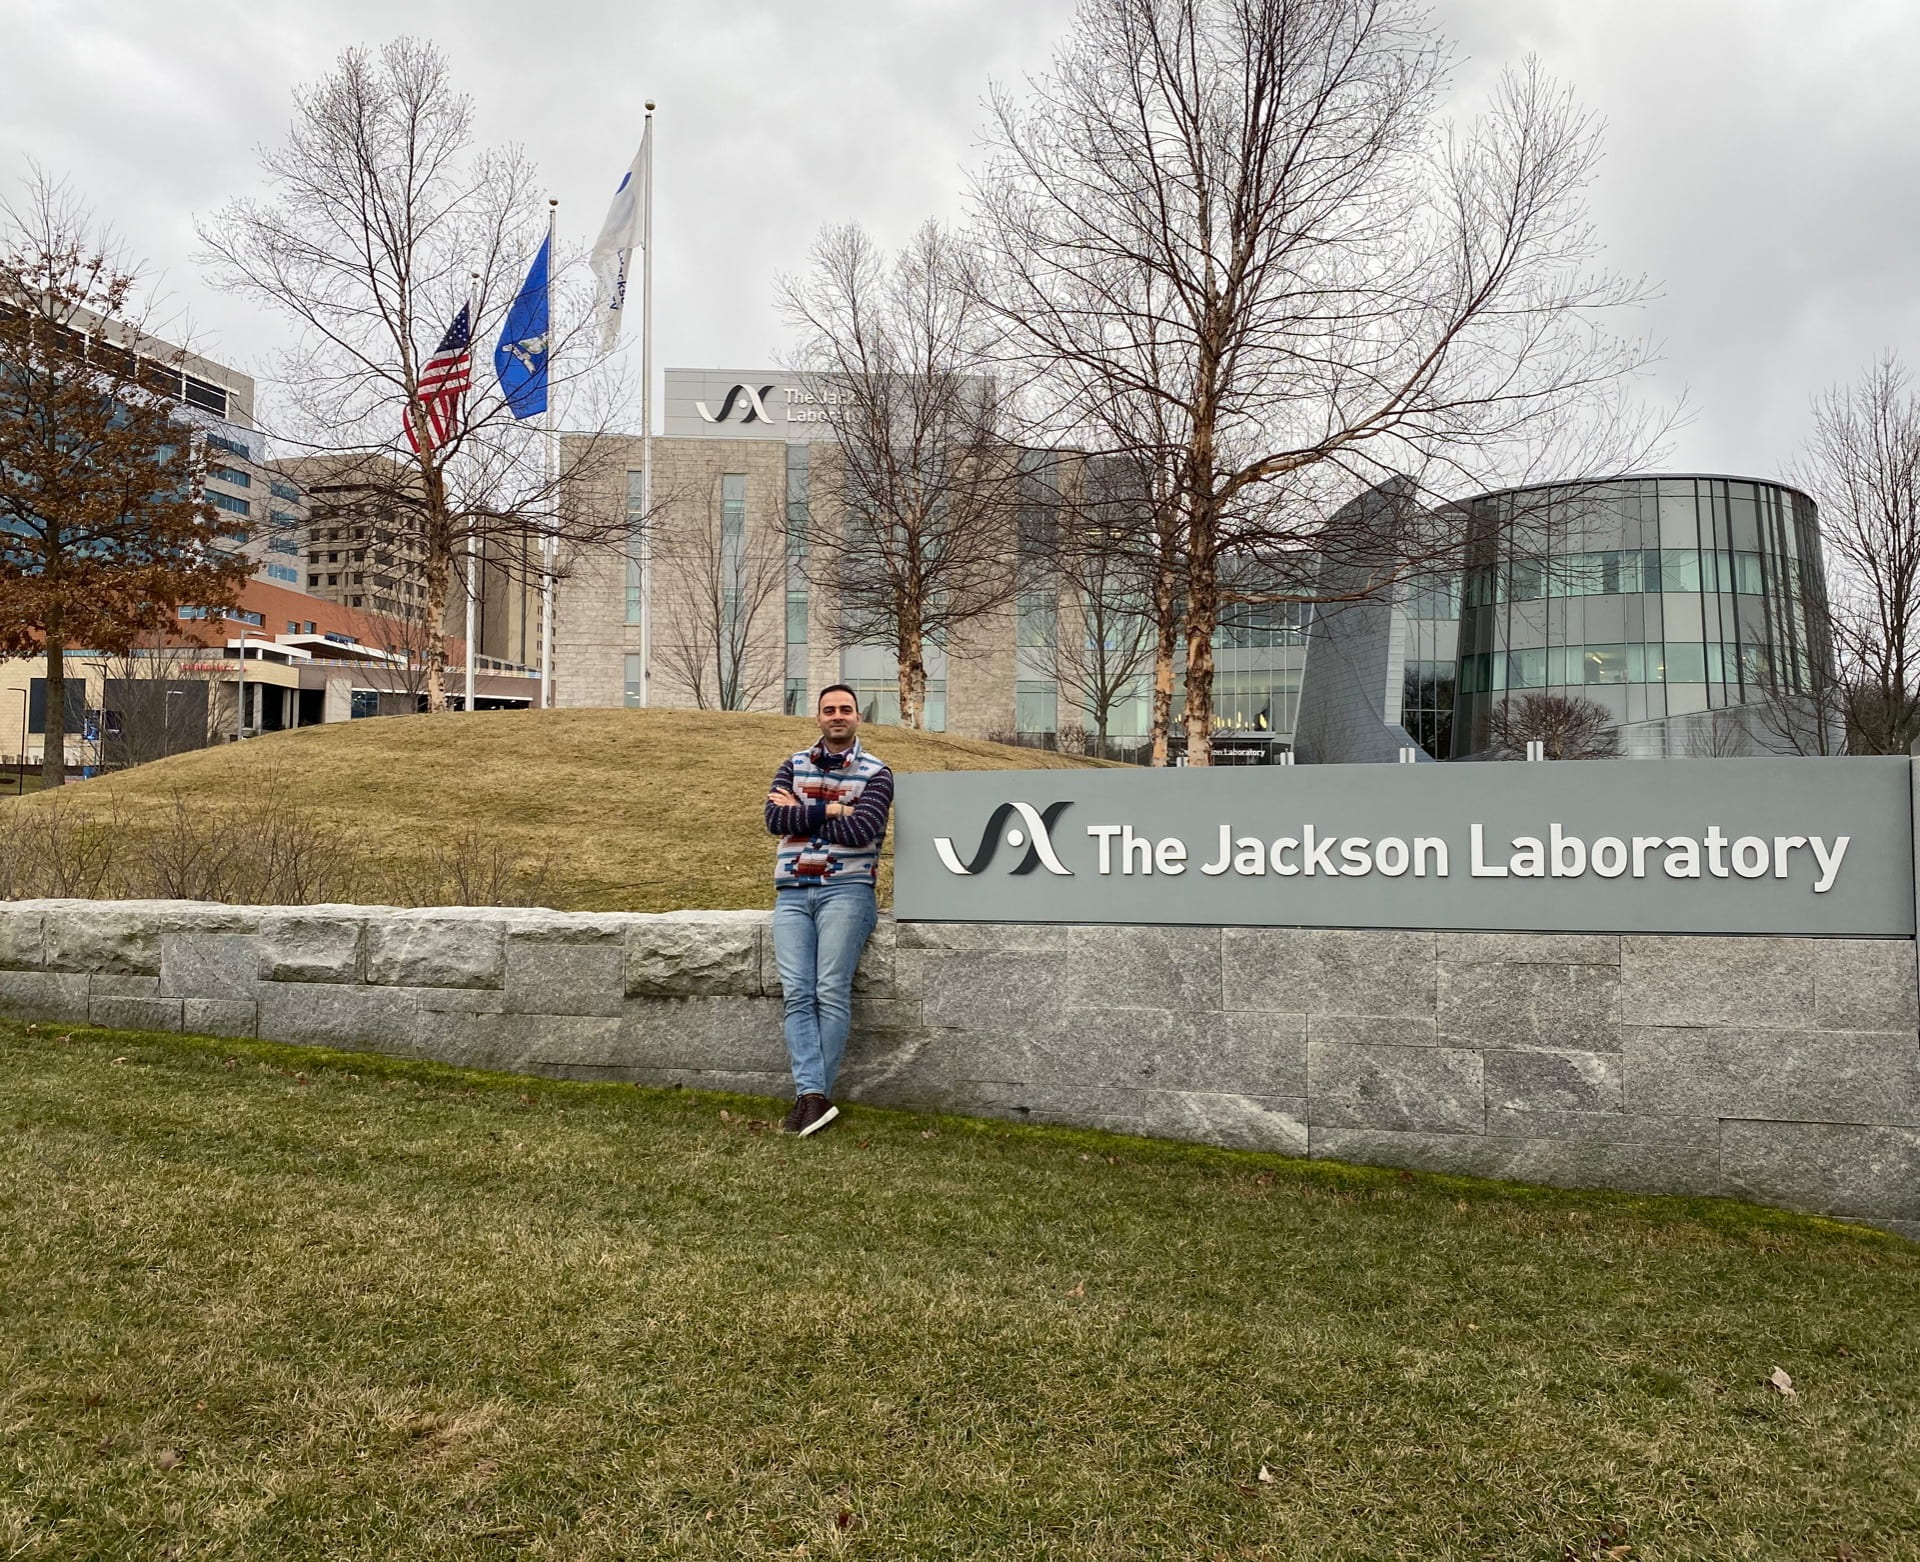 A visit to The Jackson Laboratory to see the lab space and office!